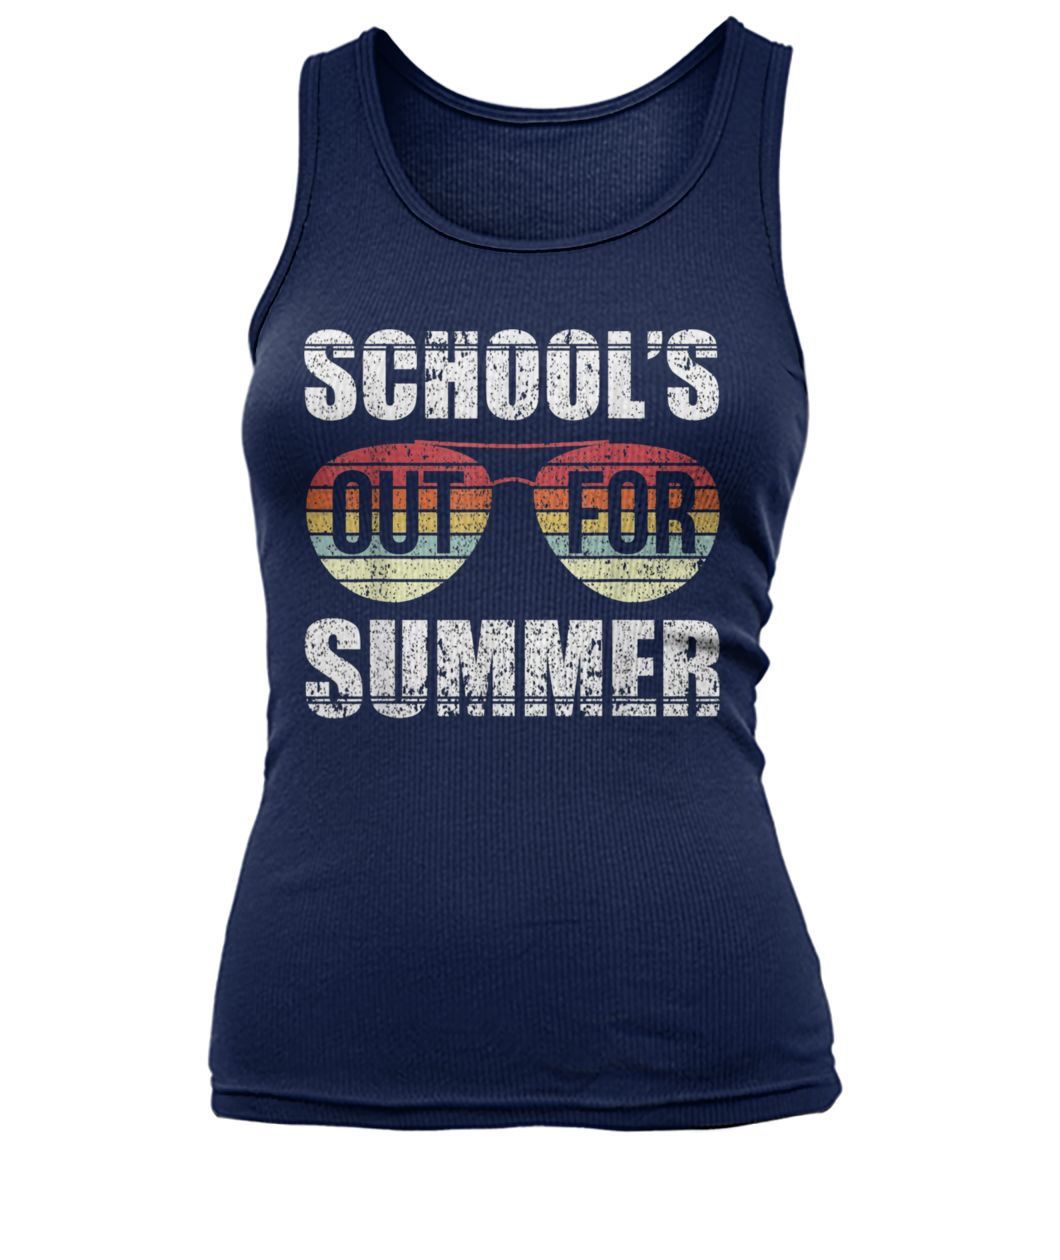 Vintage school's out for the summer women's tank top